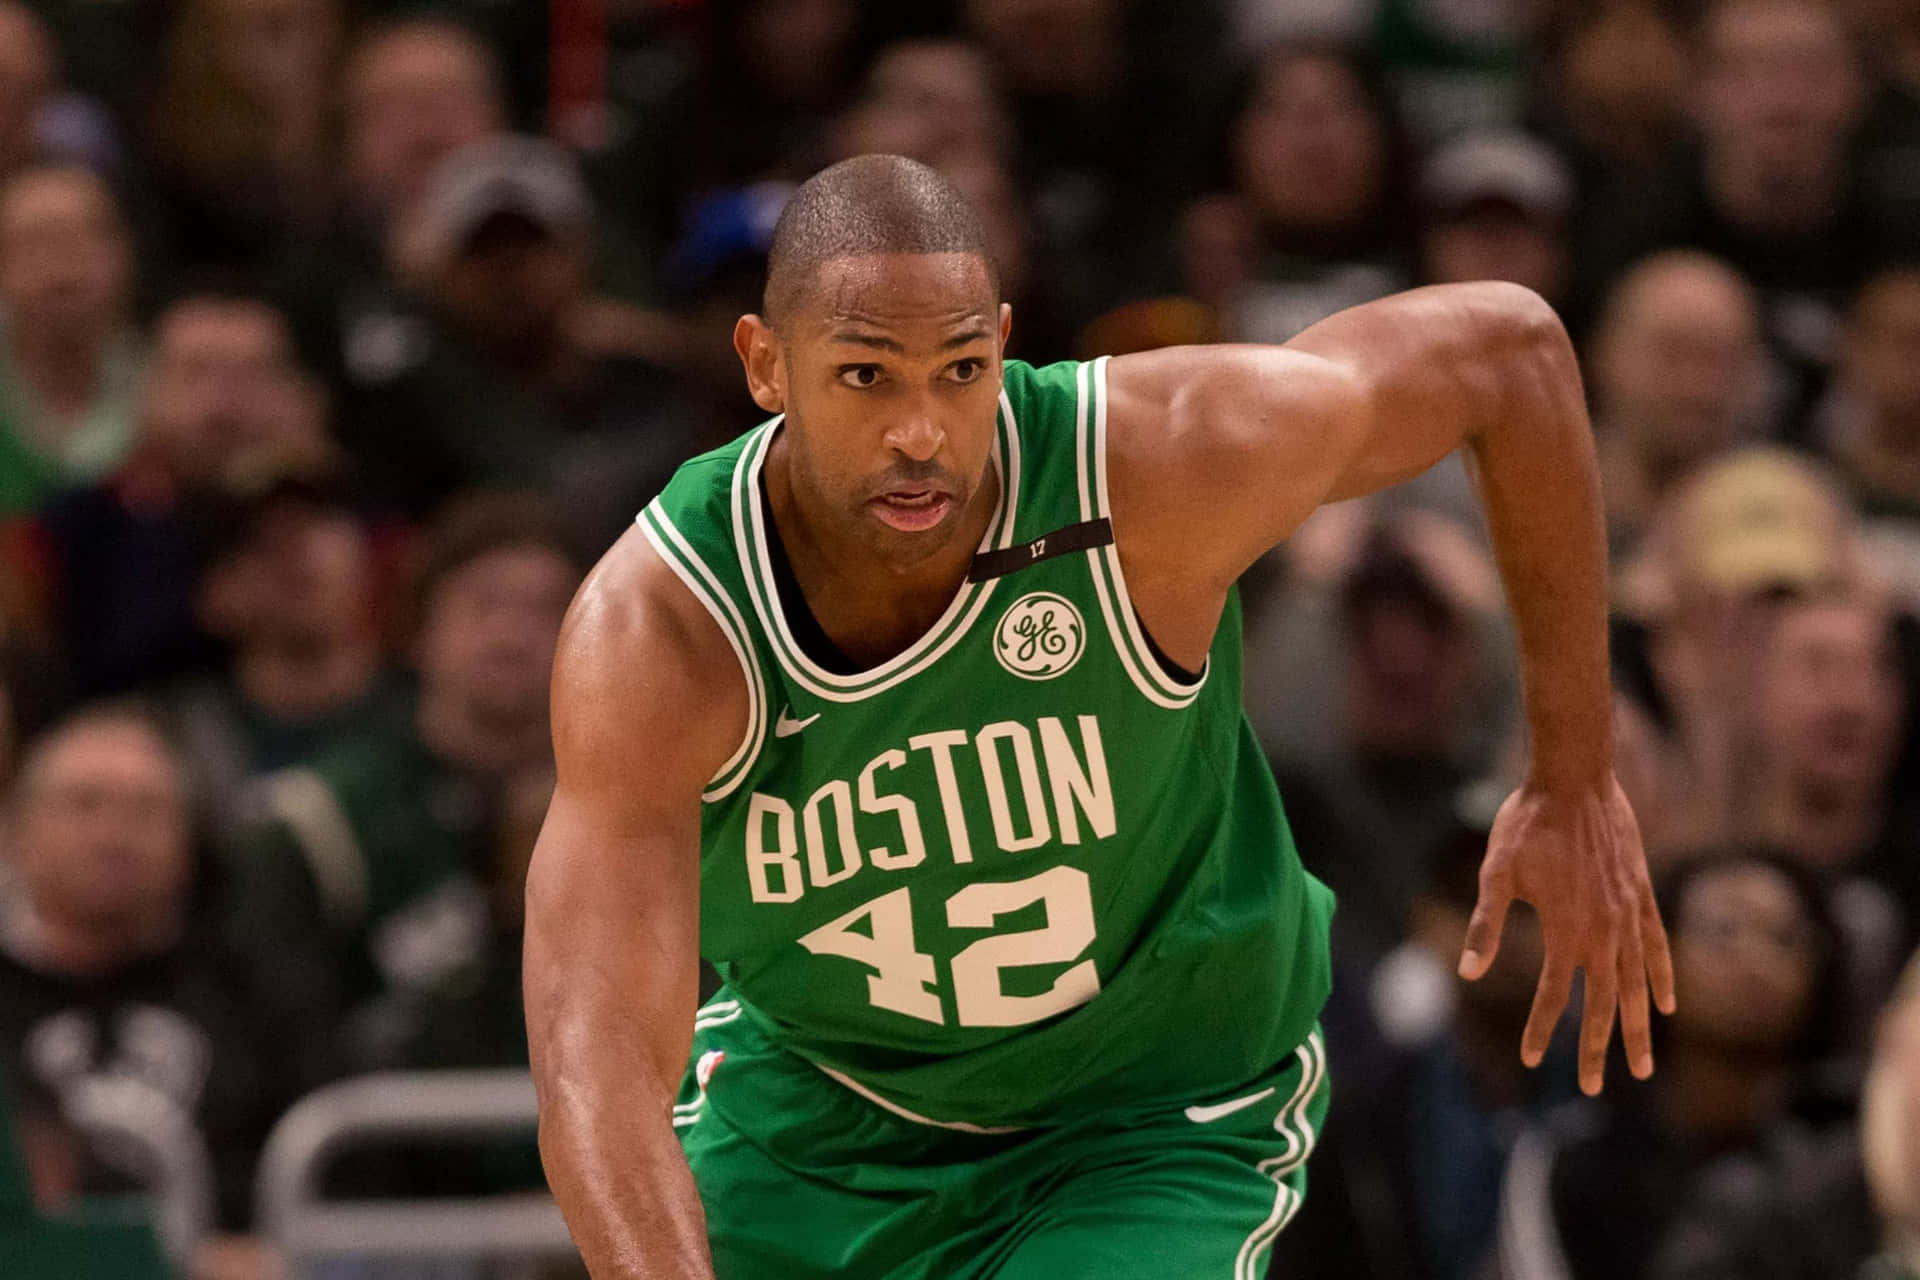 Al Horford passionately competing on the basketball court for the Boston Celtics